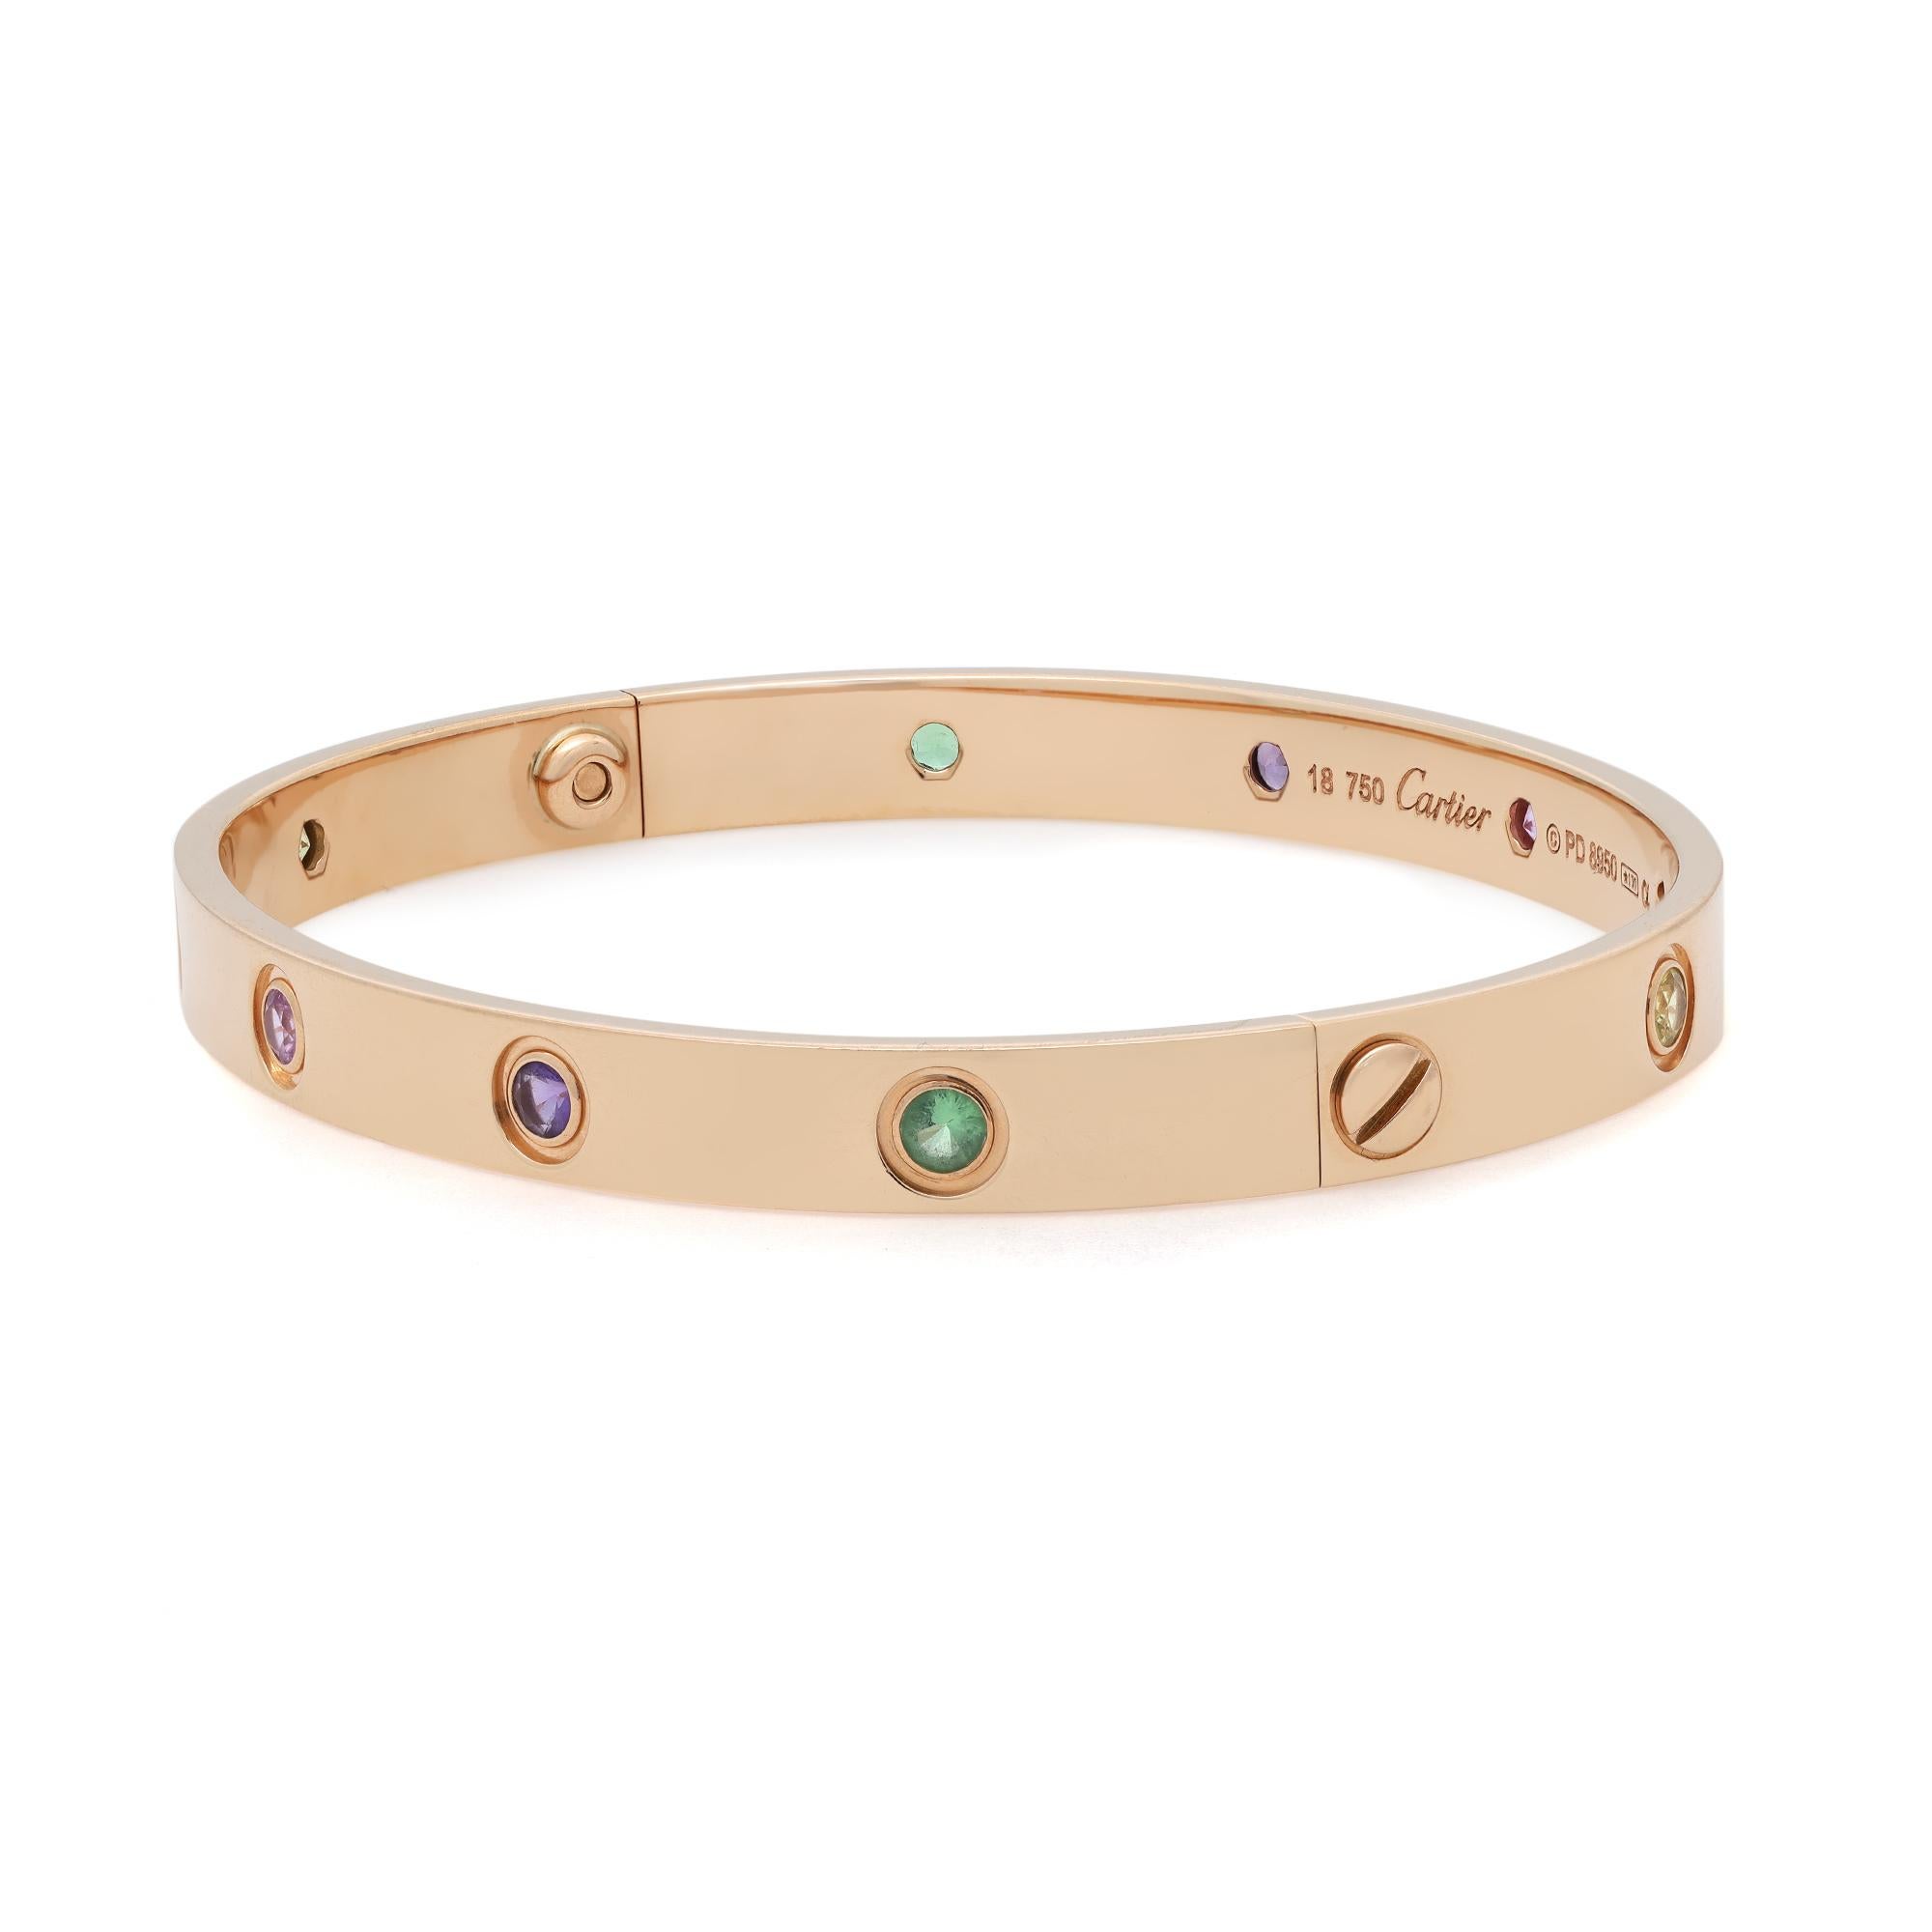 Cartier Love bracelet crafted in 18k rose gold, set with 10 round cut colored gemstones. Size: 18. Old screw style system. Width: 6.1 mm. Total weight: 29 grams. Great pre-owned condition. Will be polished before shipping. Comes with a screwdriver.